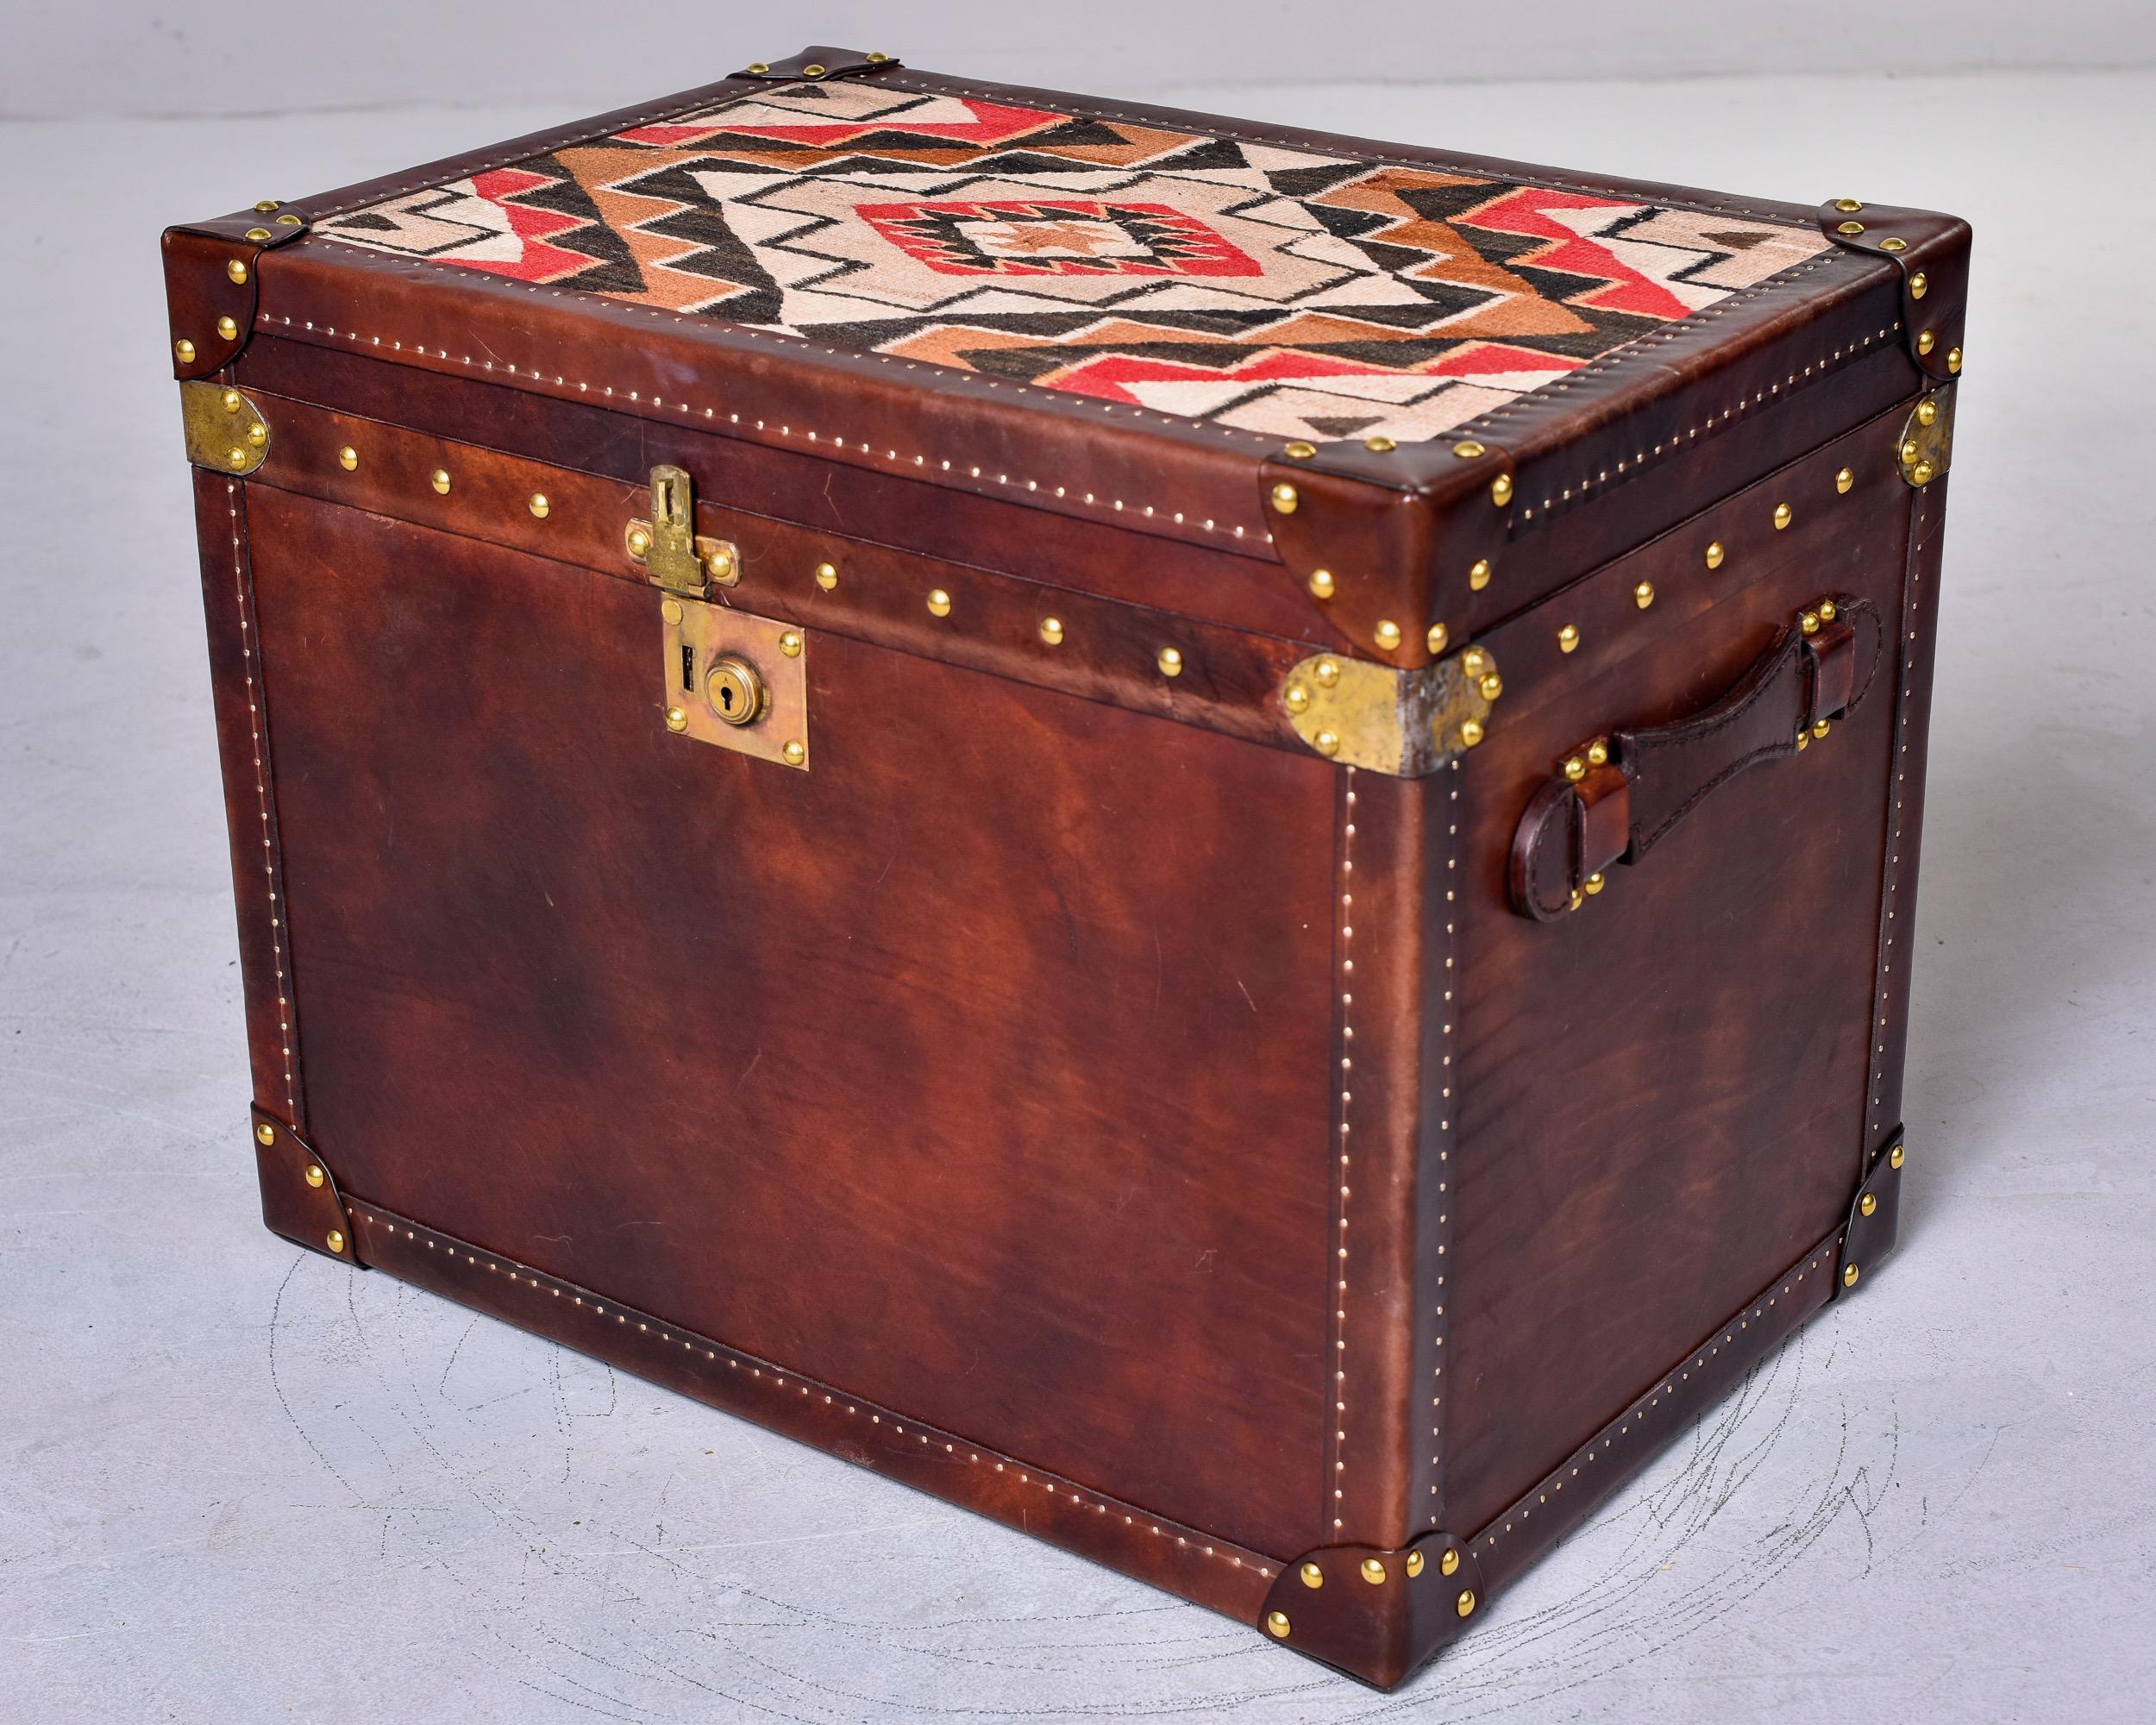 Leather Covered Trunk with Vintage Hardware and Kilim on Top Panel For Sale 2